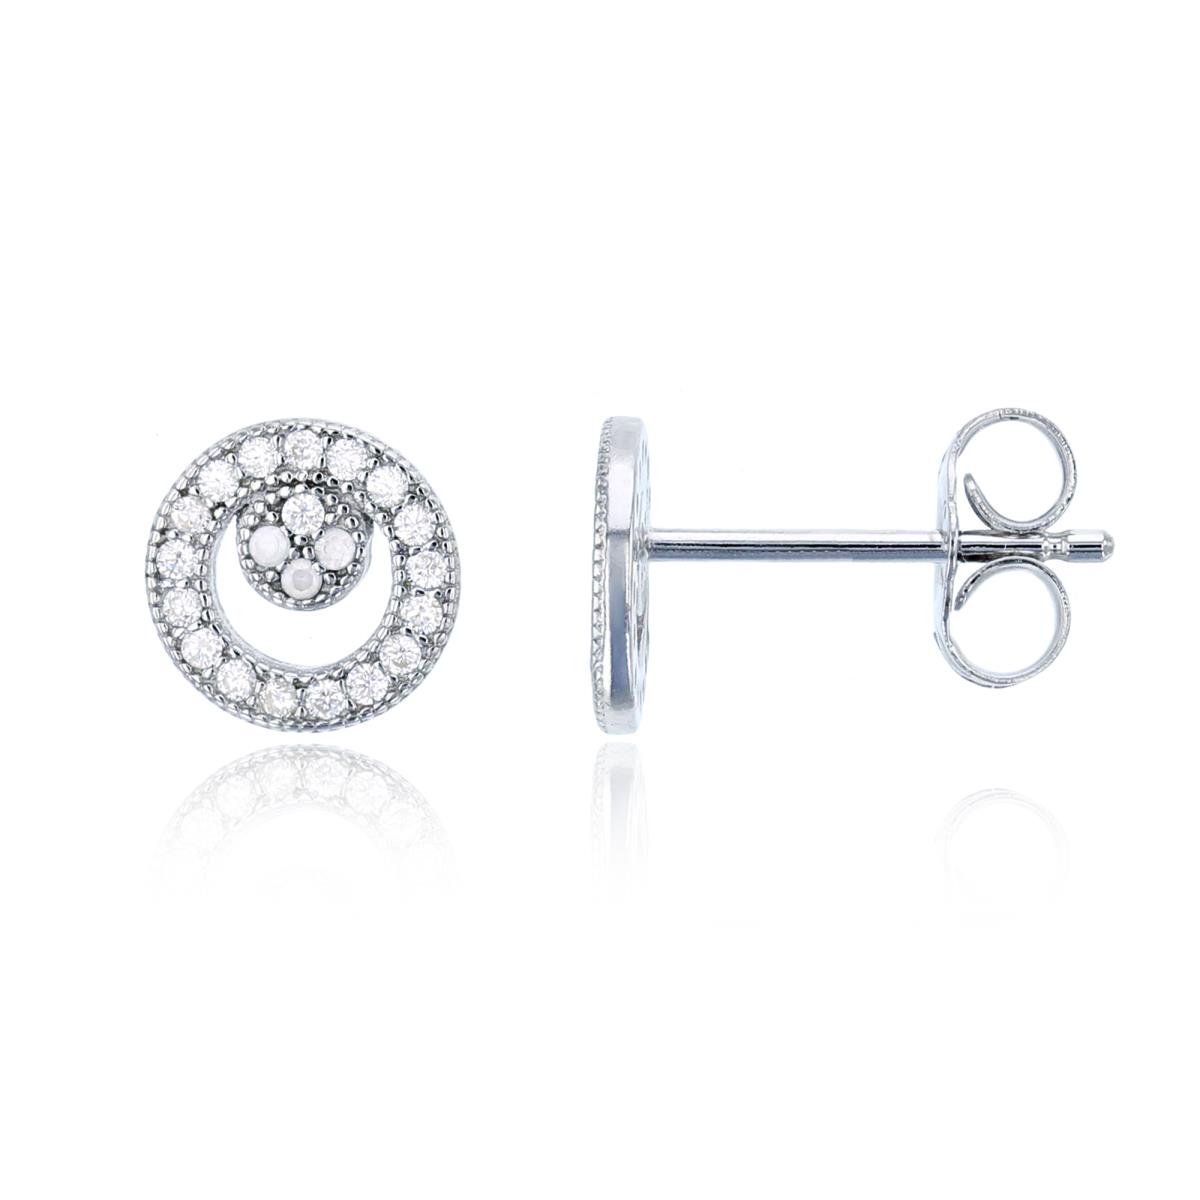 Sterling Silver Rhodium 7.7x7.7mm Micropave Petite Round Stud Earring